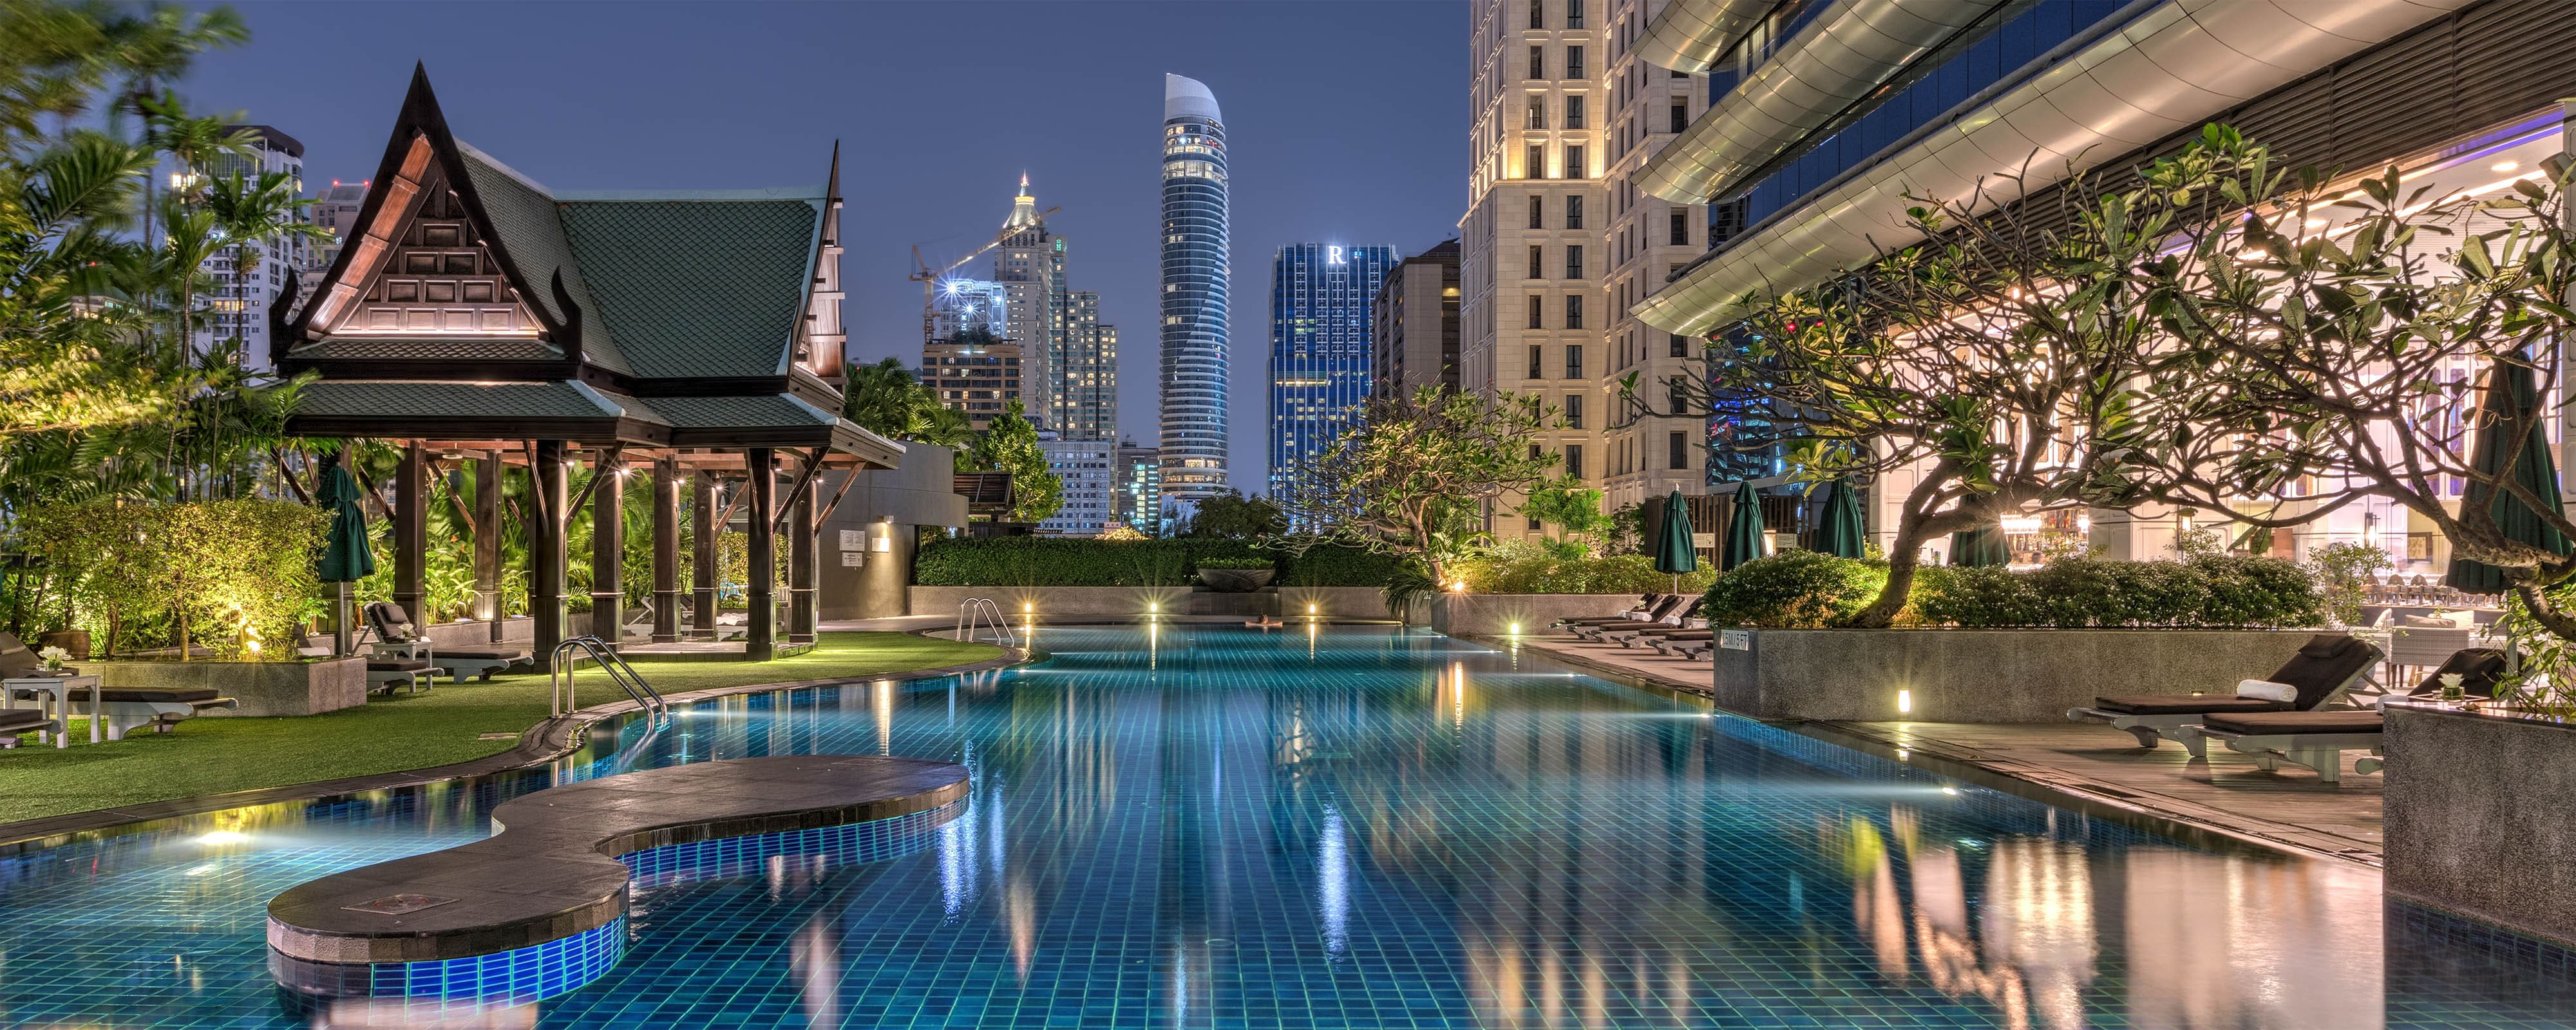 Luxushotels in Bangkok | The Athenee Hotel, a Luxury Collection Hotel ...